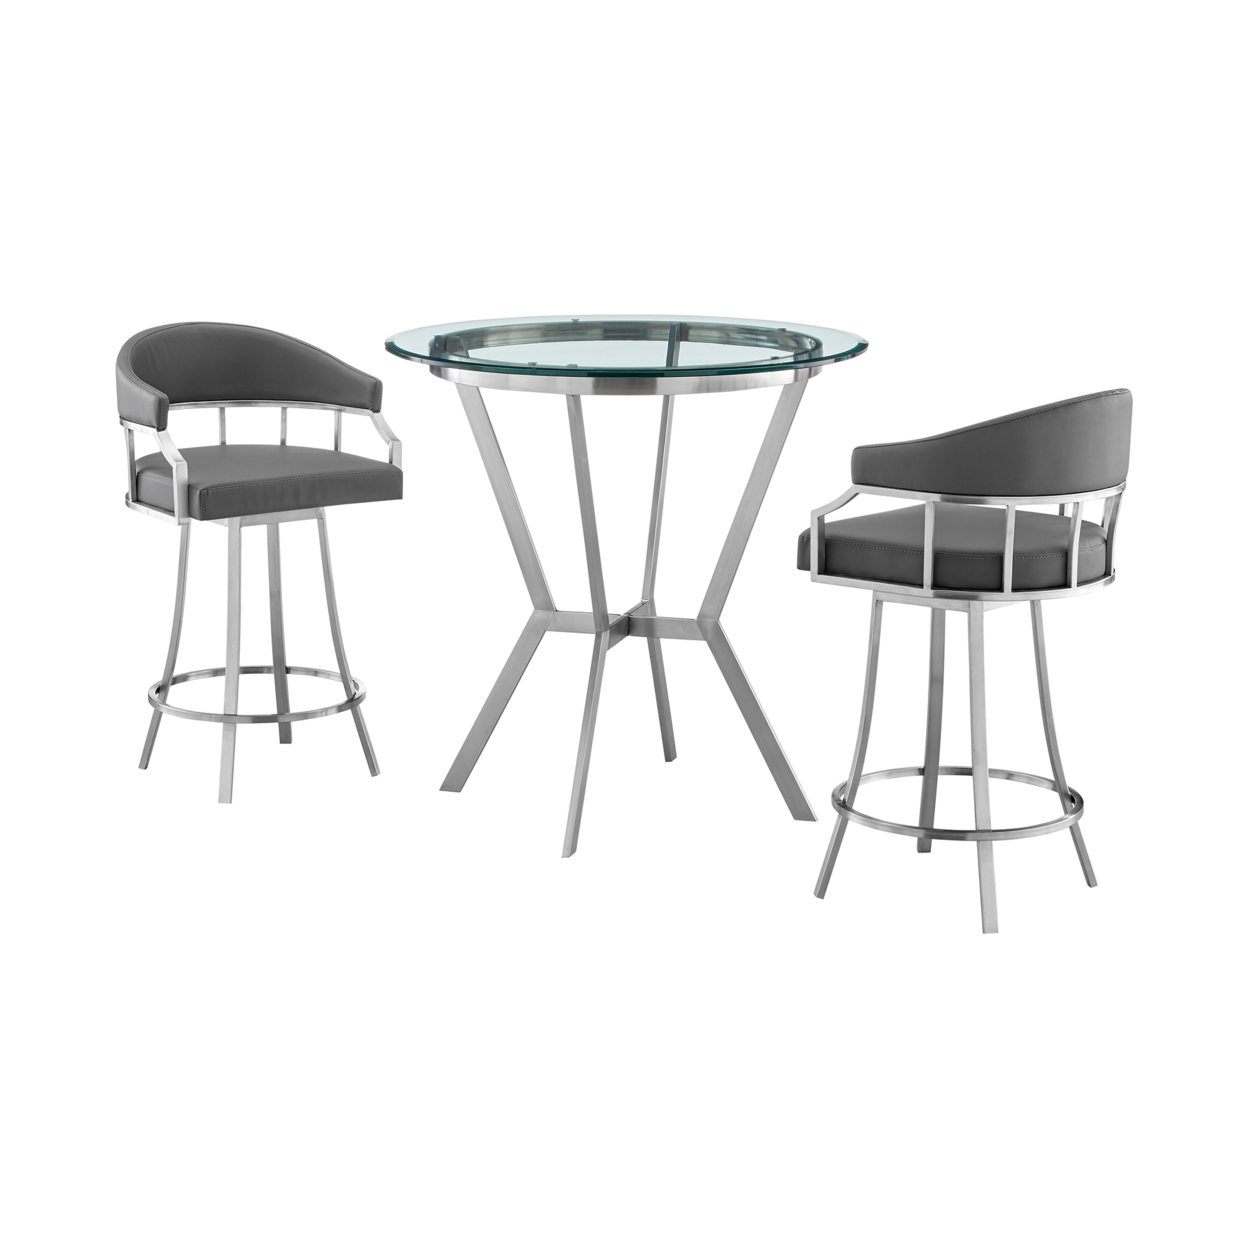 Amy 3 Piece Counter Height Dining Table Set, Round Glass Top, Gray, Silver- Saltoro Sherpi